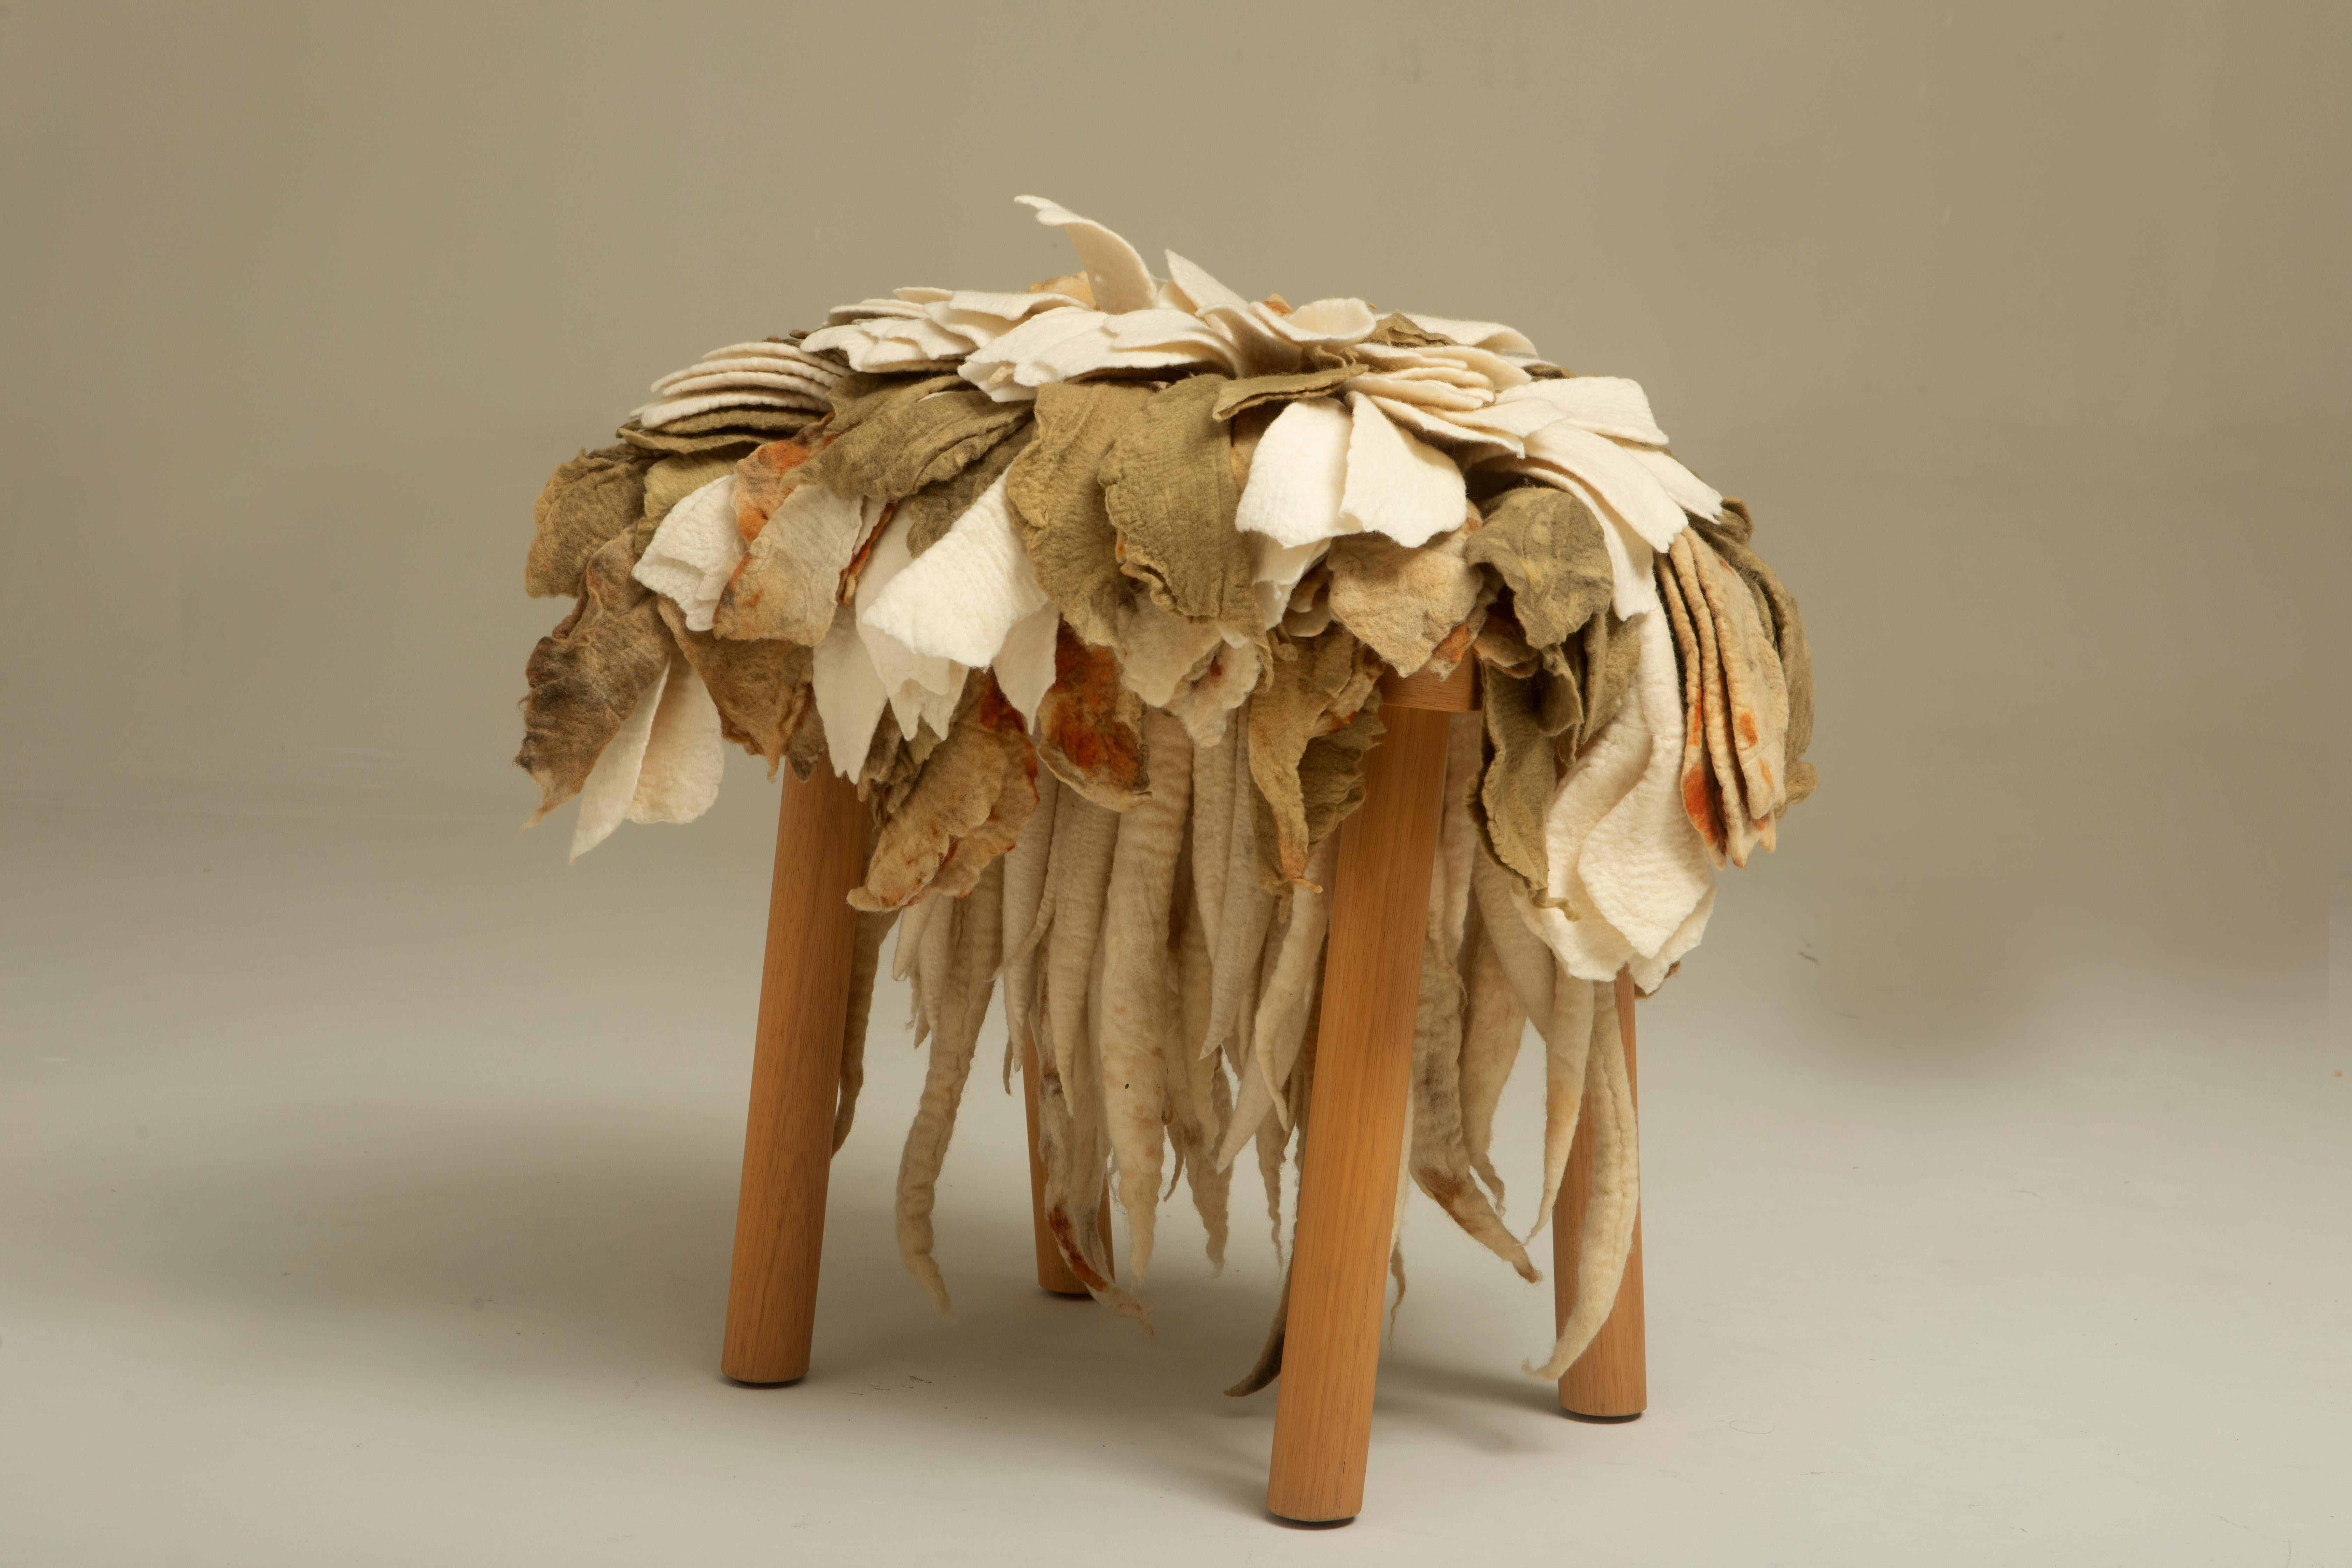 “Florada” Stool in Wool and Wood by Inês Schertel, Brazil, 2021

Ines Schertel's primary material is sheep's wool. As a practitioner of Slow Design, the artist takes a holistic approach to textile design, personally overseeing the whole process from